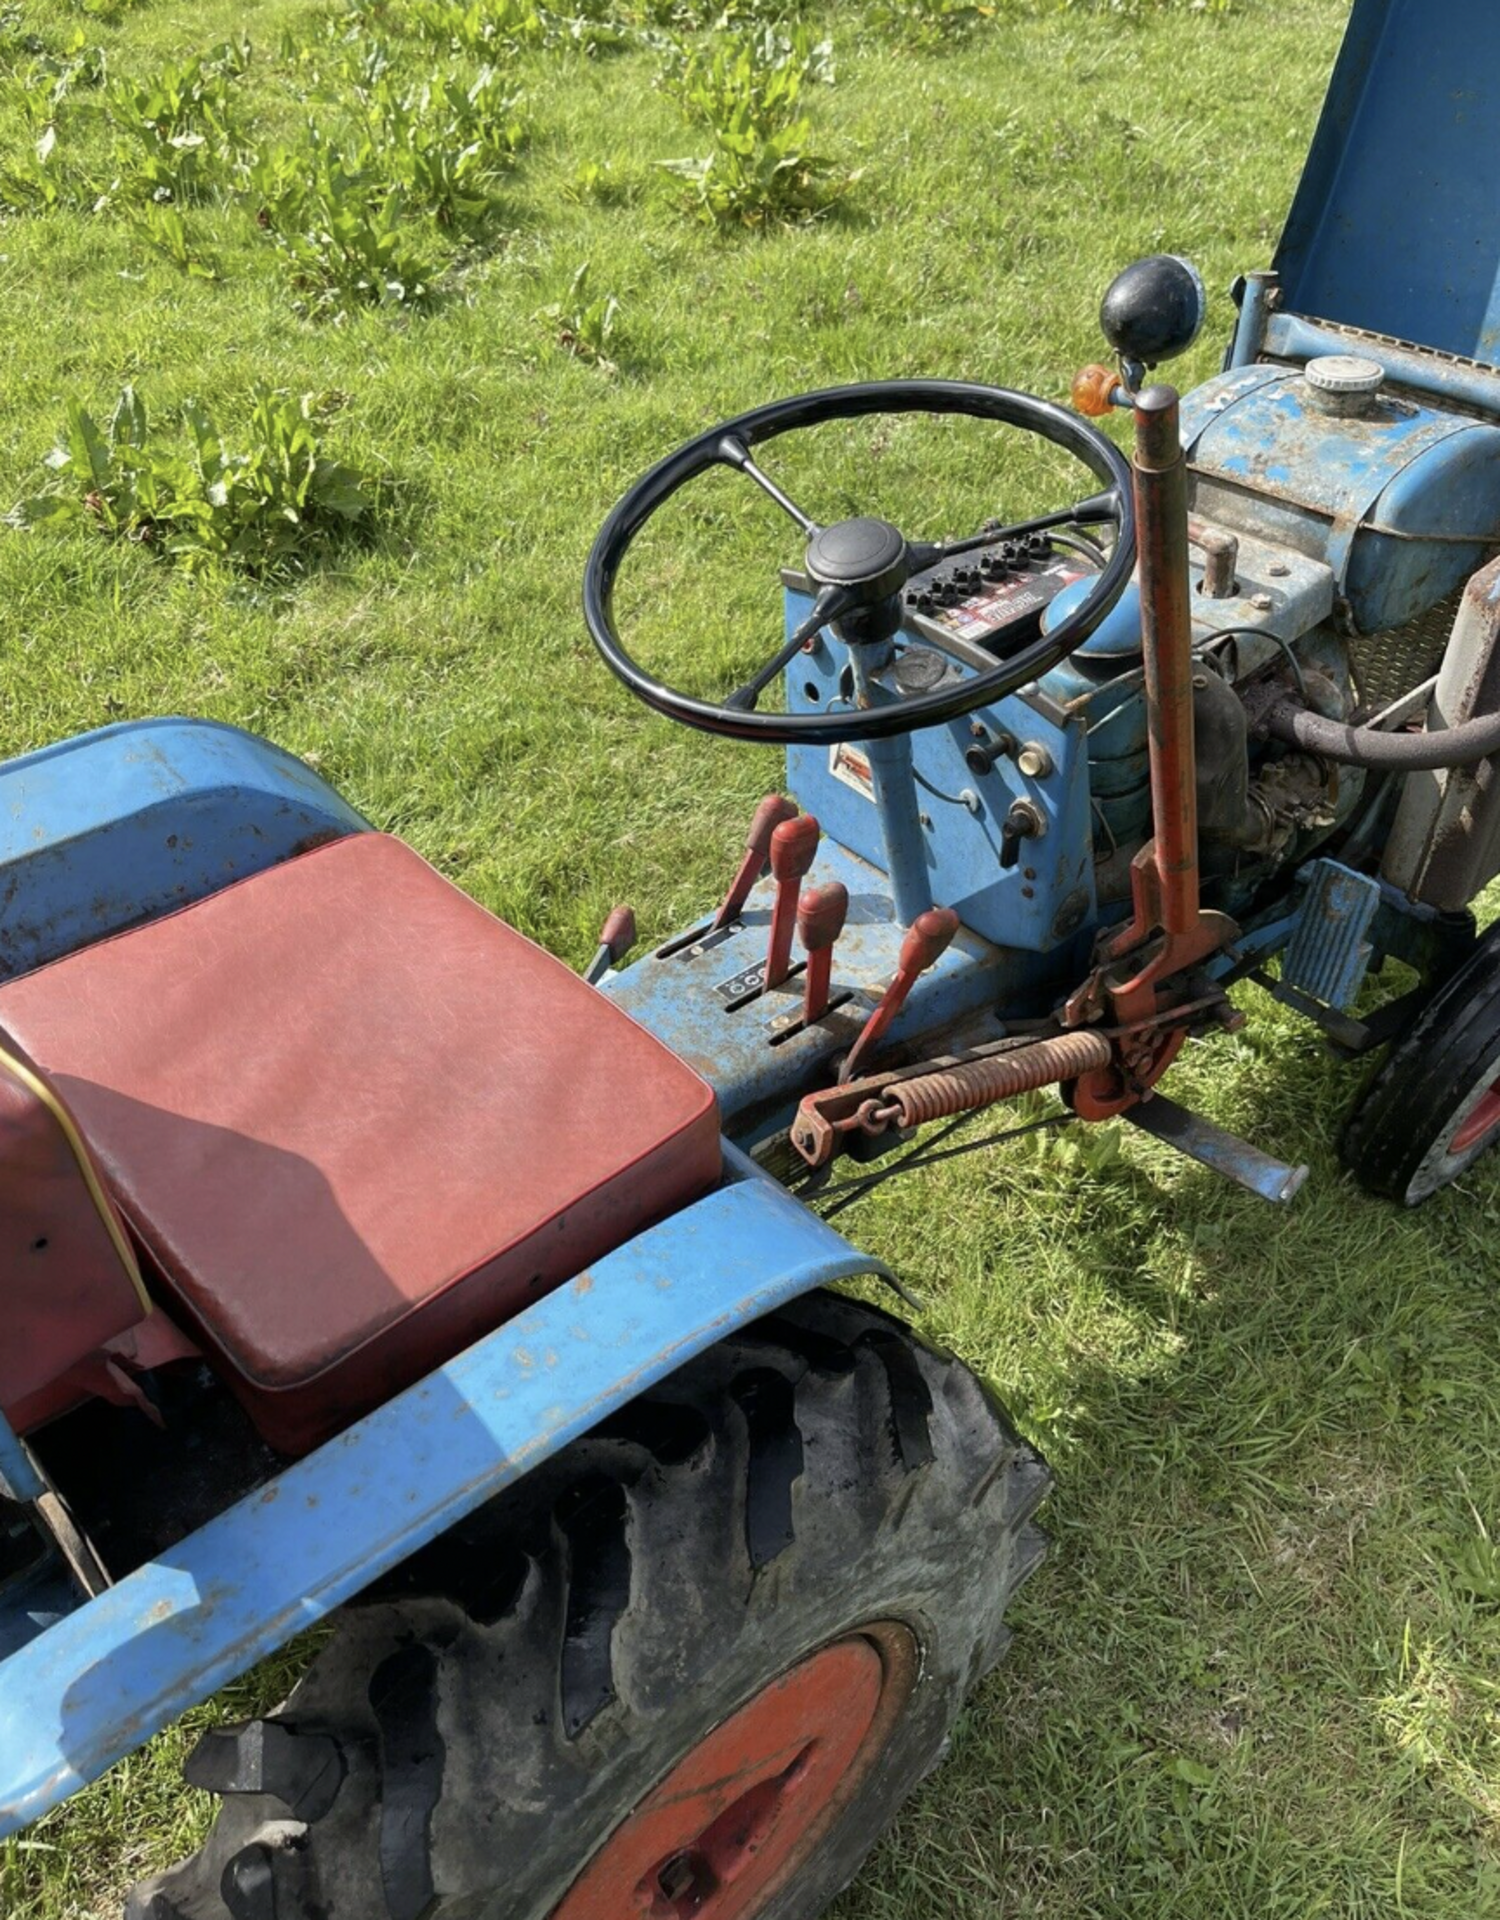 Gutbrod tractor and rotavator - Image 6 of 9